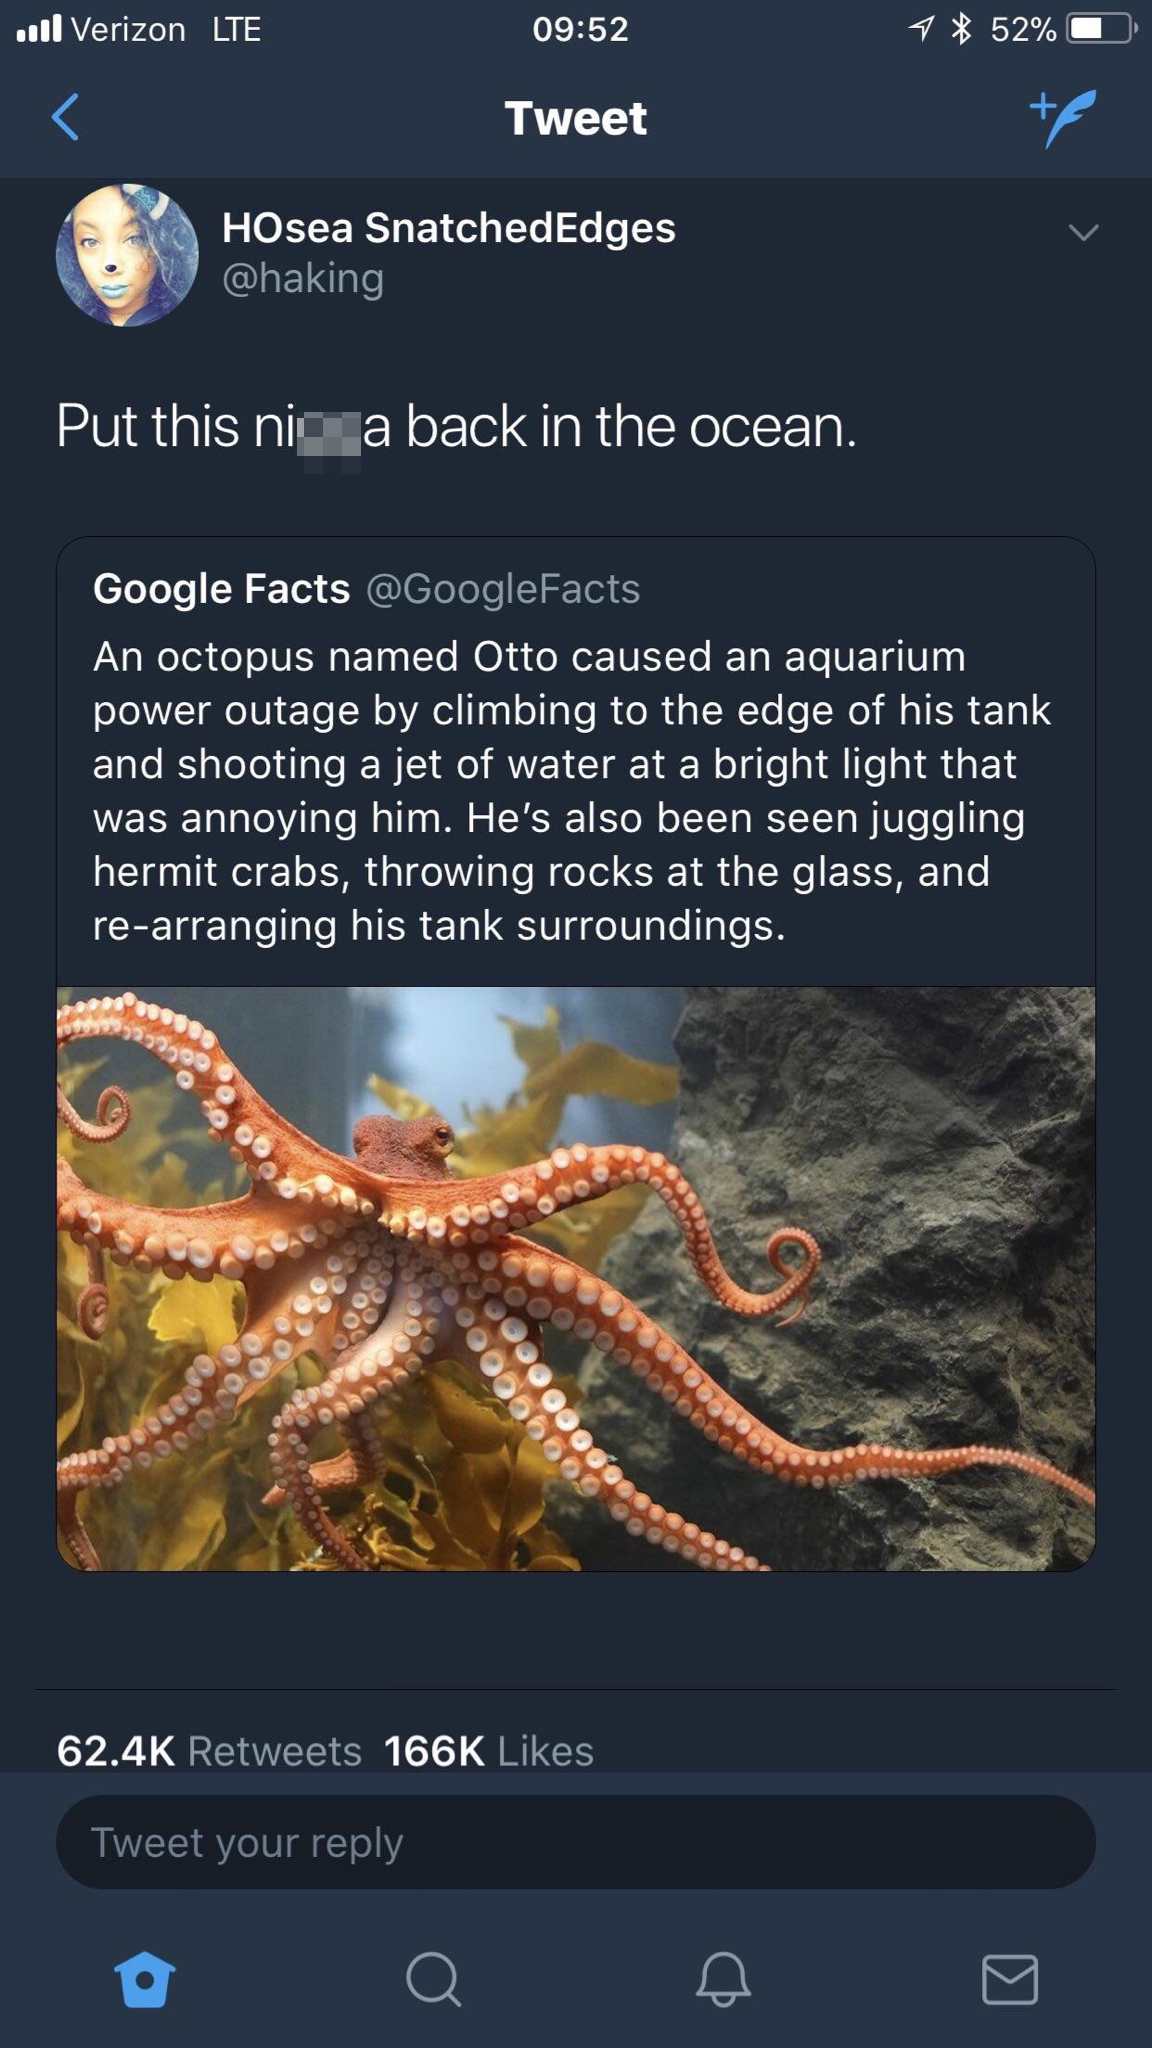 tweet - see octopus - .Verizon Ue 52% Tweet HOsea SnatchedEdges Put this nice a back in the ocean. Google Facts An octopus named Otto caused an aquarium power outage by climbing to the edge of his tank and shooting a jet of water at a bright light that wa